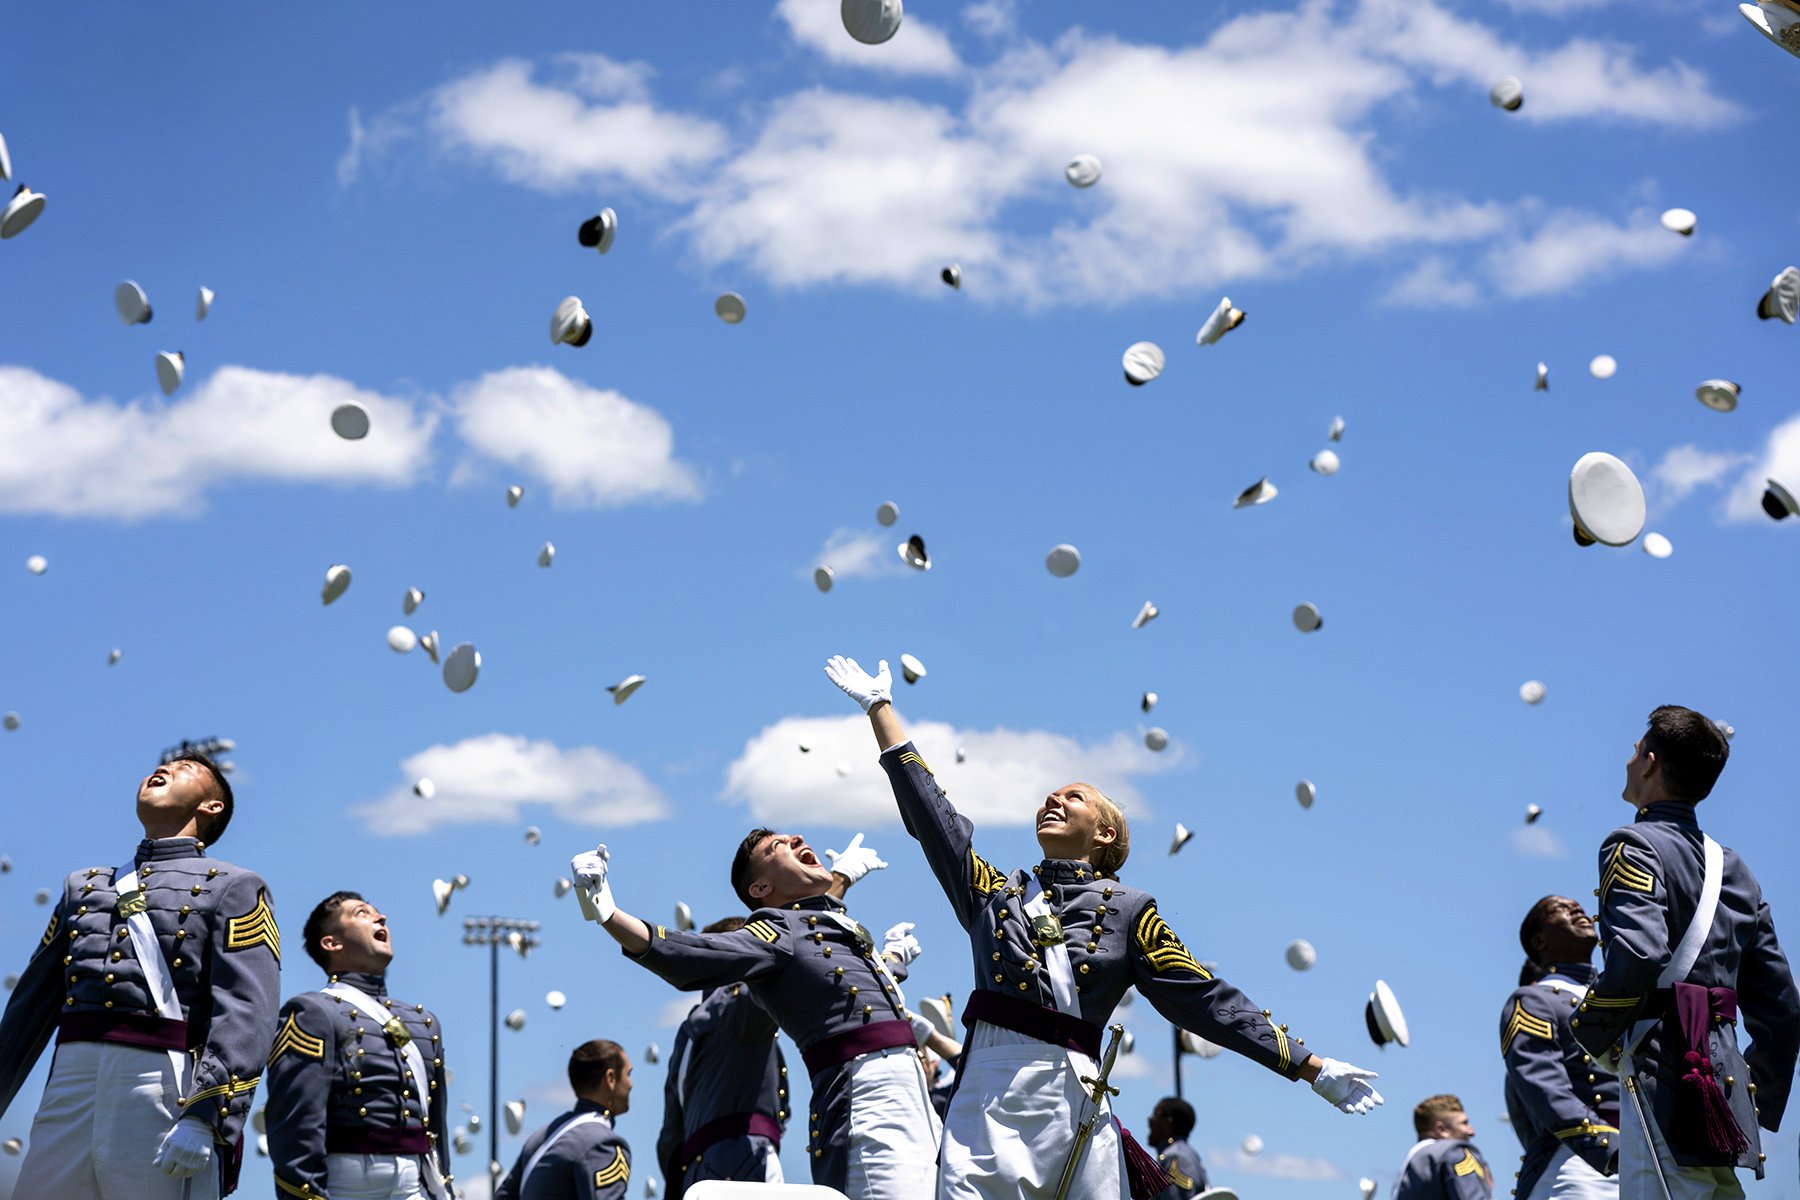 Cadets toss their hats into the air after their graduation and commissioning ceremony at the academy in West Point, N.Y. (Photo by Tsubasa Berg)